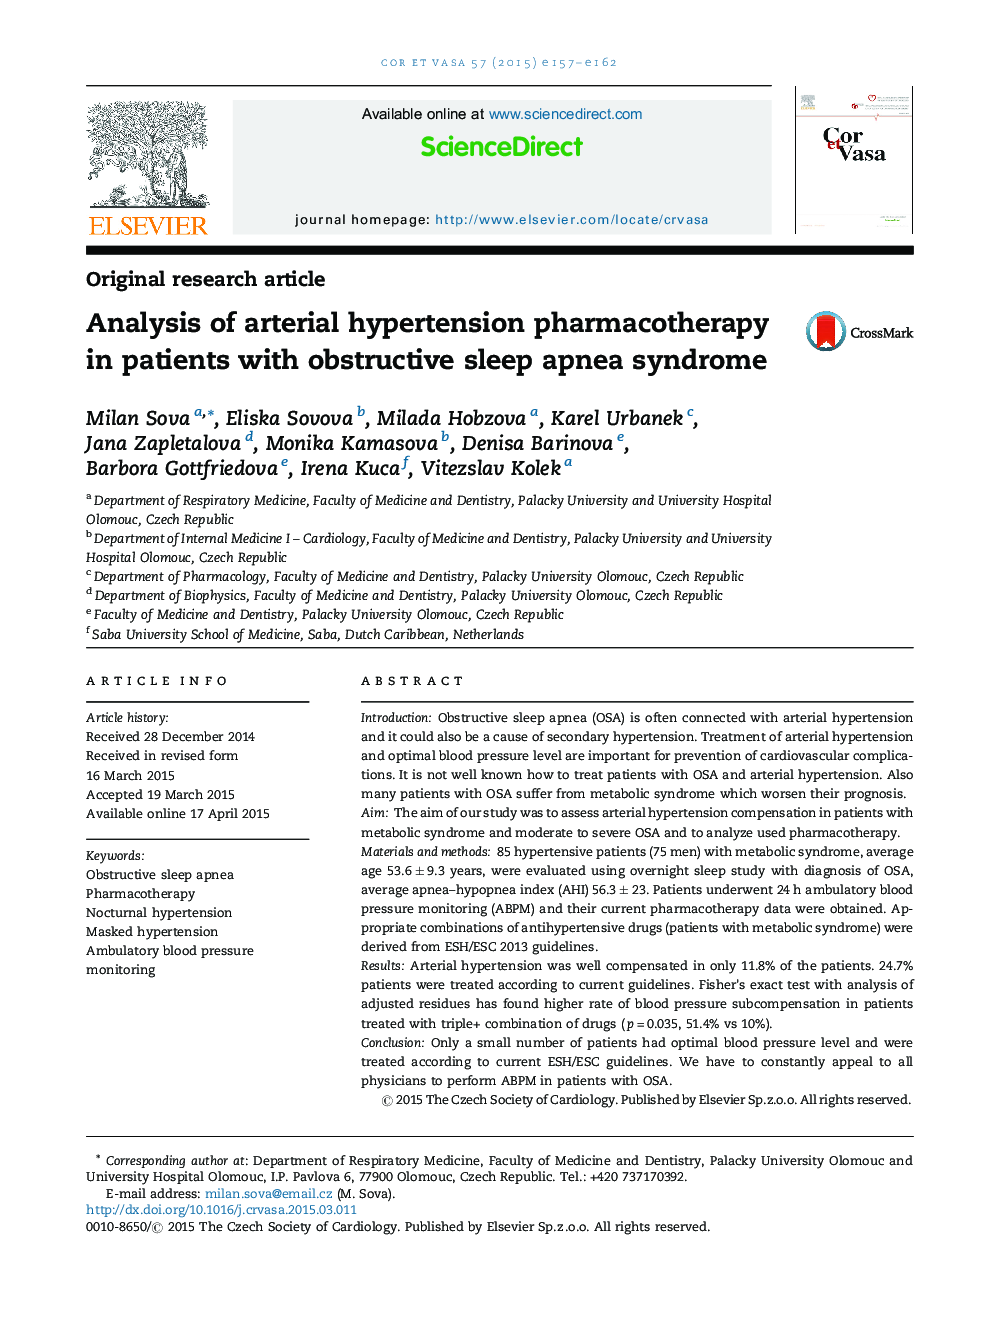 Analysis of arterial hypertension pharmacotherapy in patients with obstructive sleep apnea syndrome